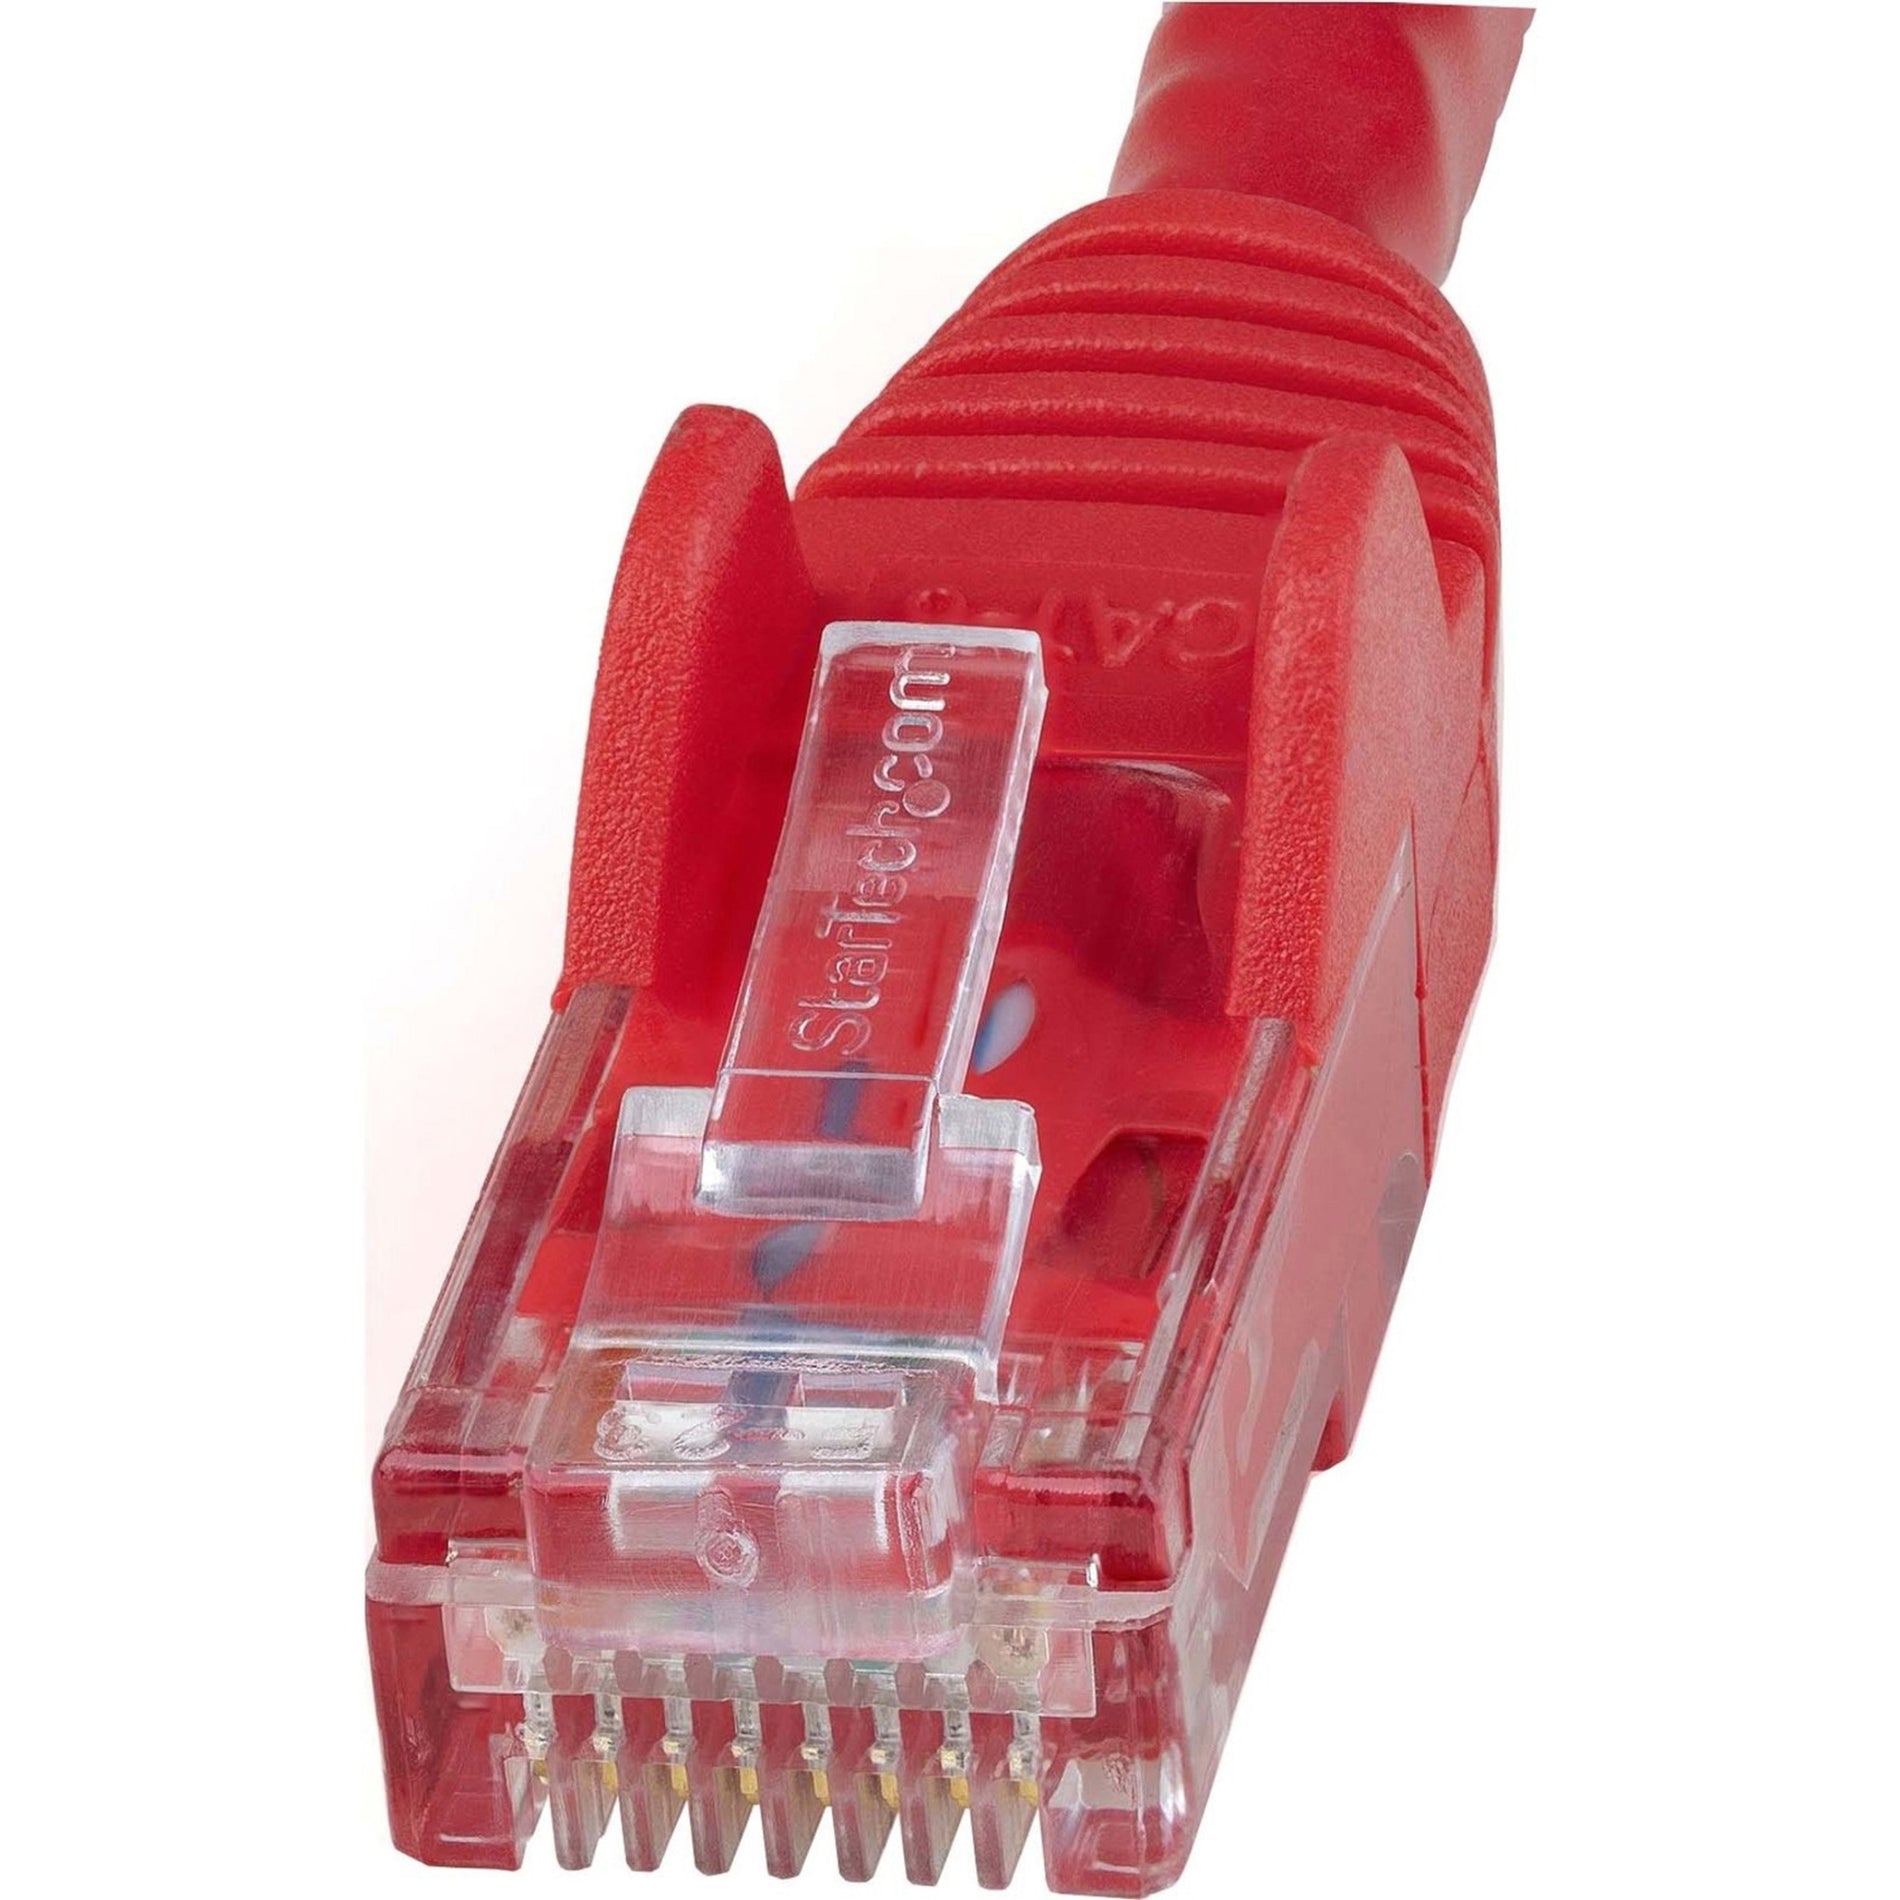 StarTech.com N6PATCH15RD 15 ft Red Snagless Cat6 UTP Patch Cable, Molded, 10 Gbit/s, Lifetime Warranty